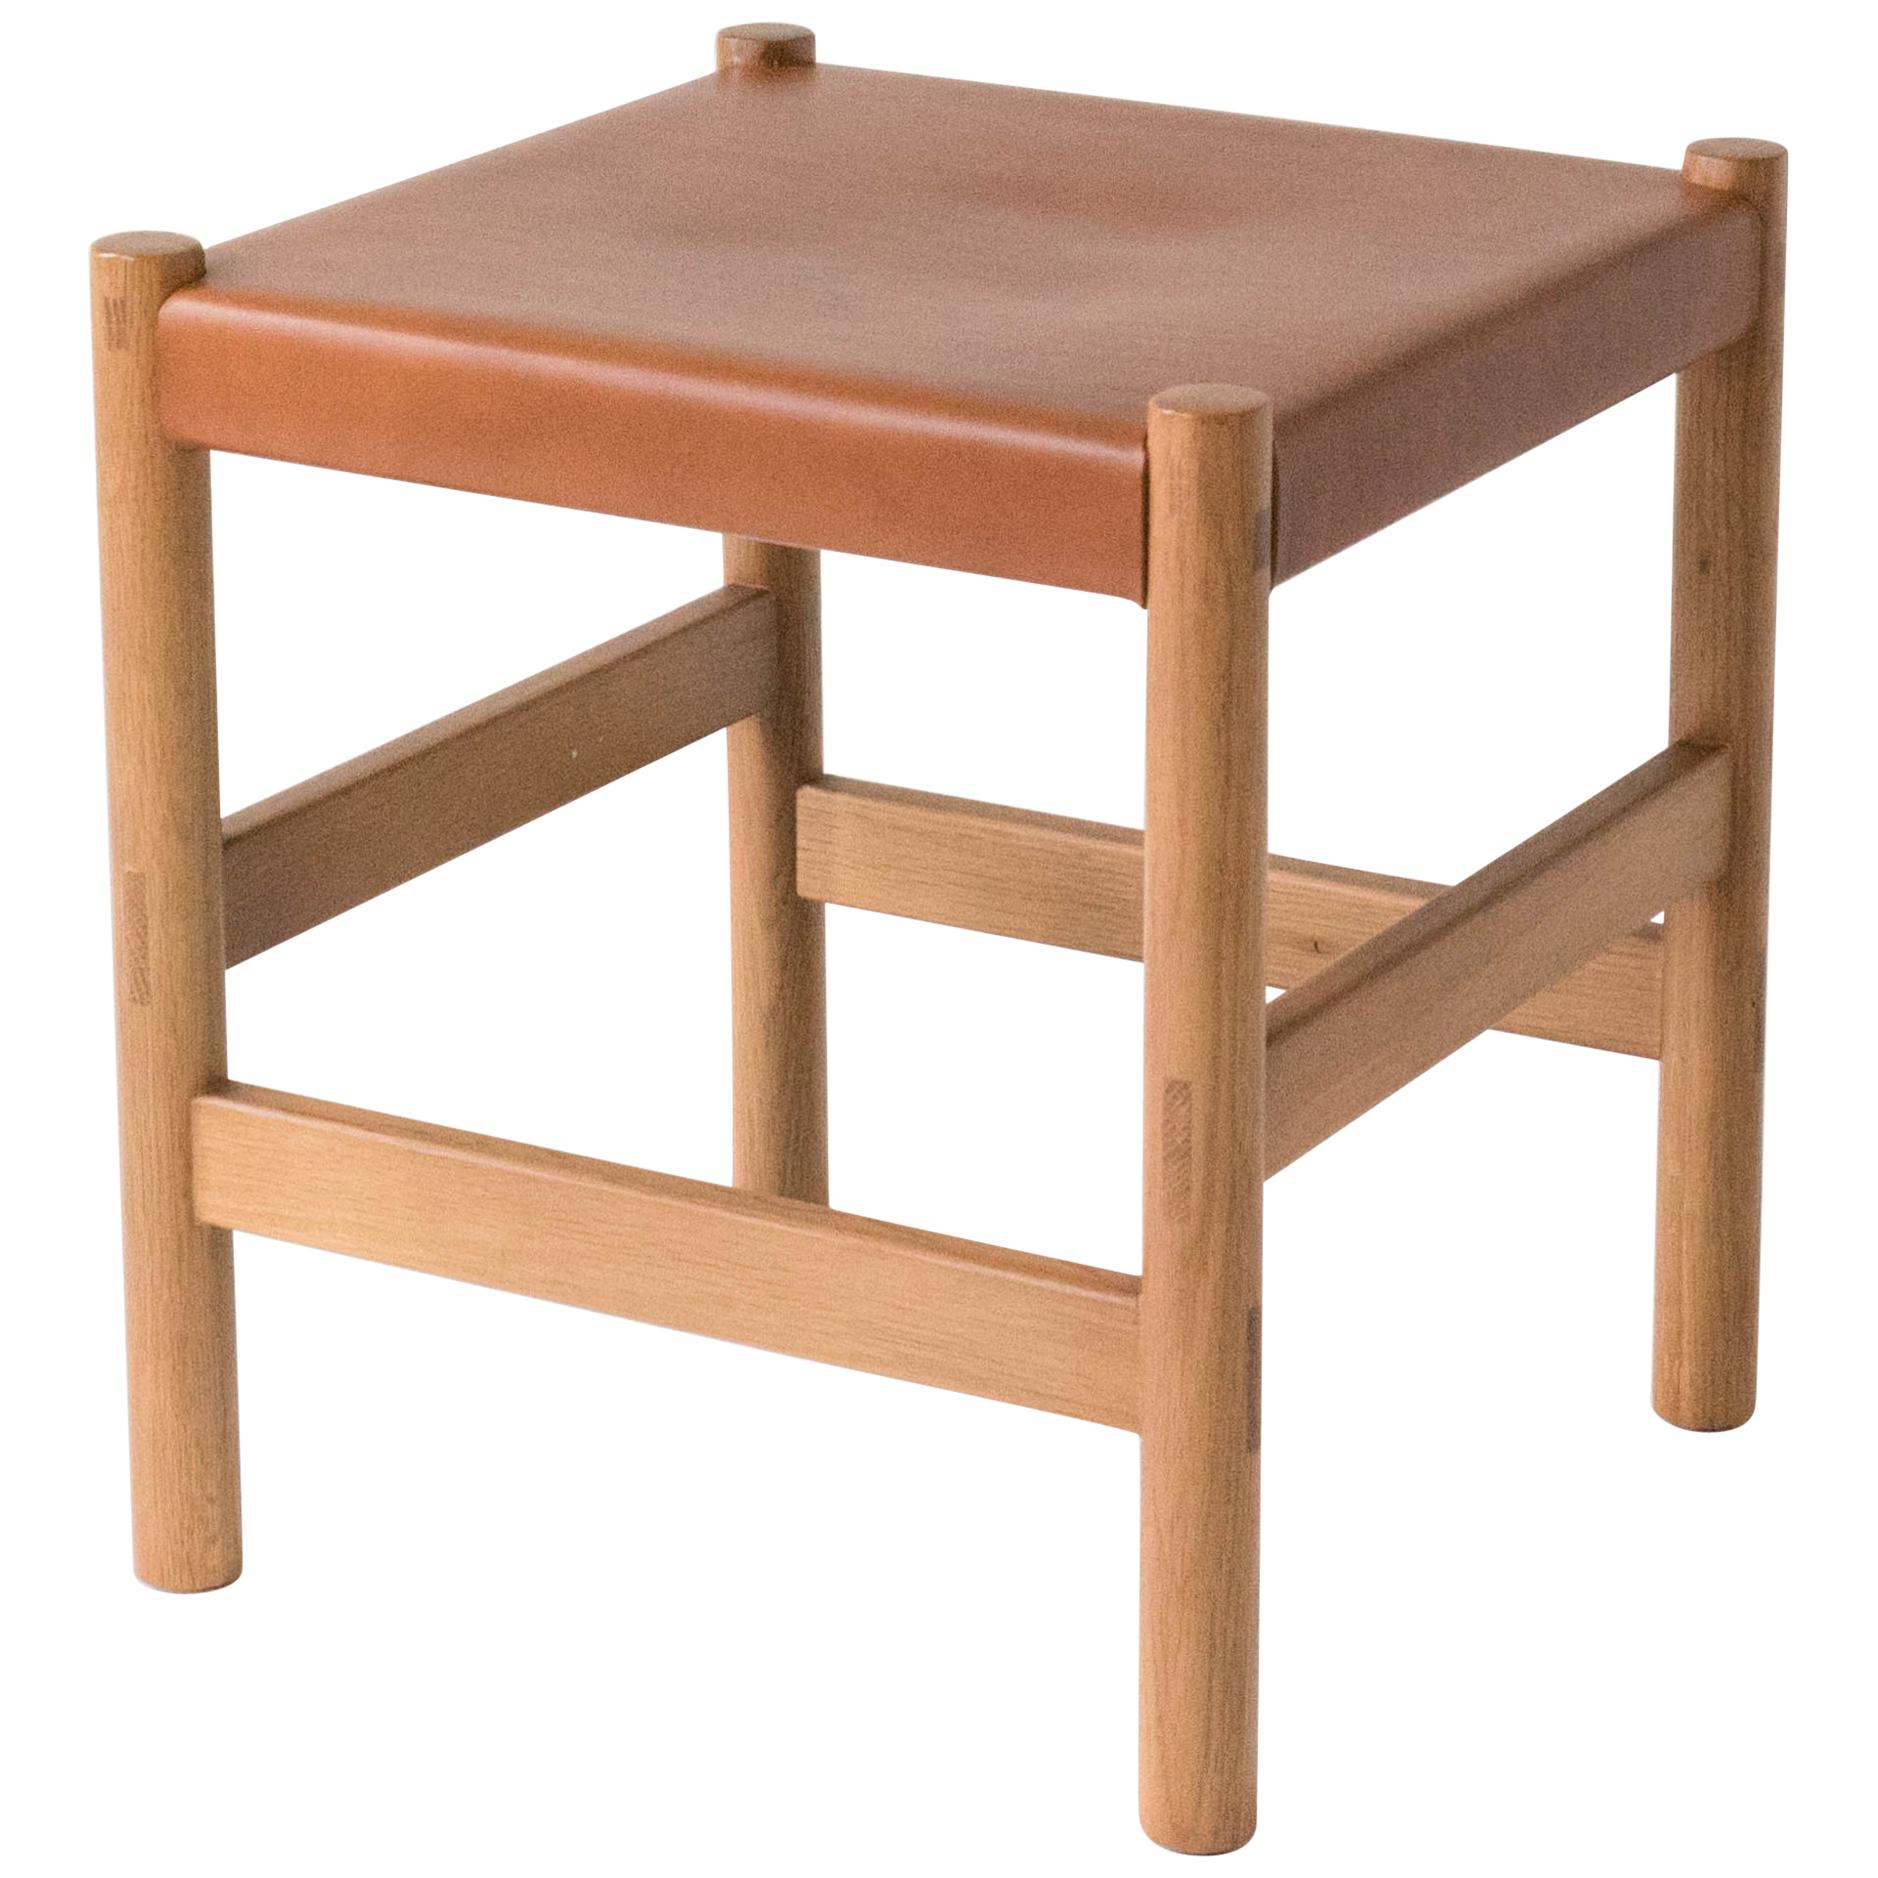 Juniper Stool by Sun at Six, Sienna Minimalist Stool in Wood and Leather